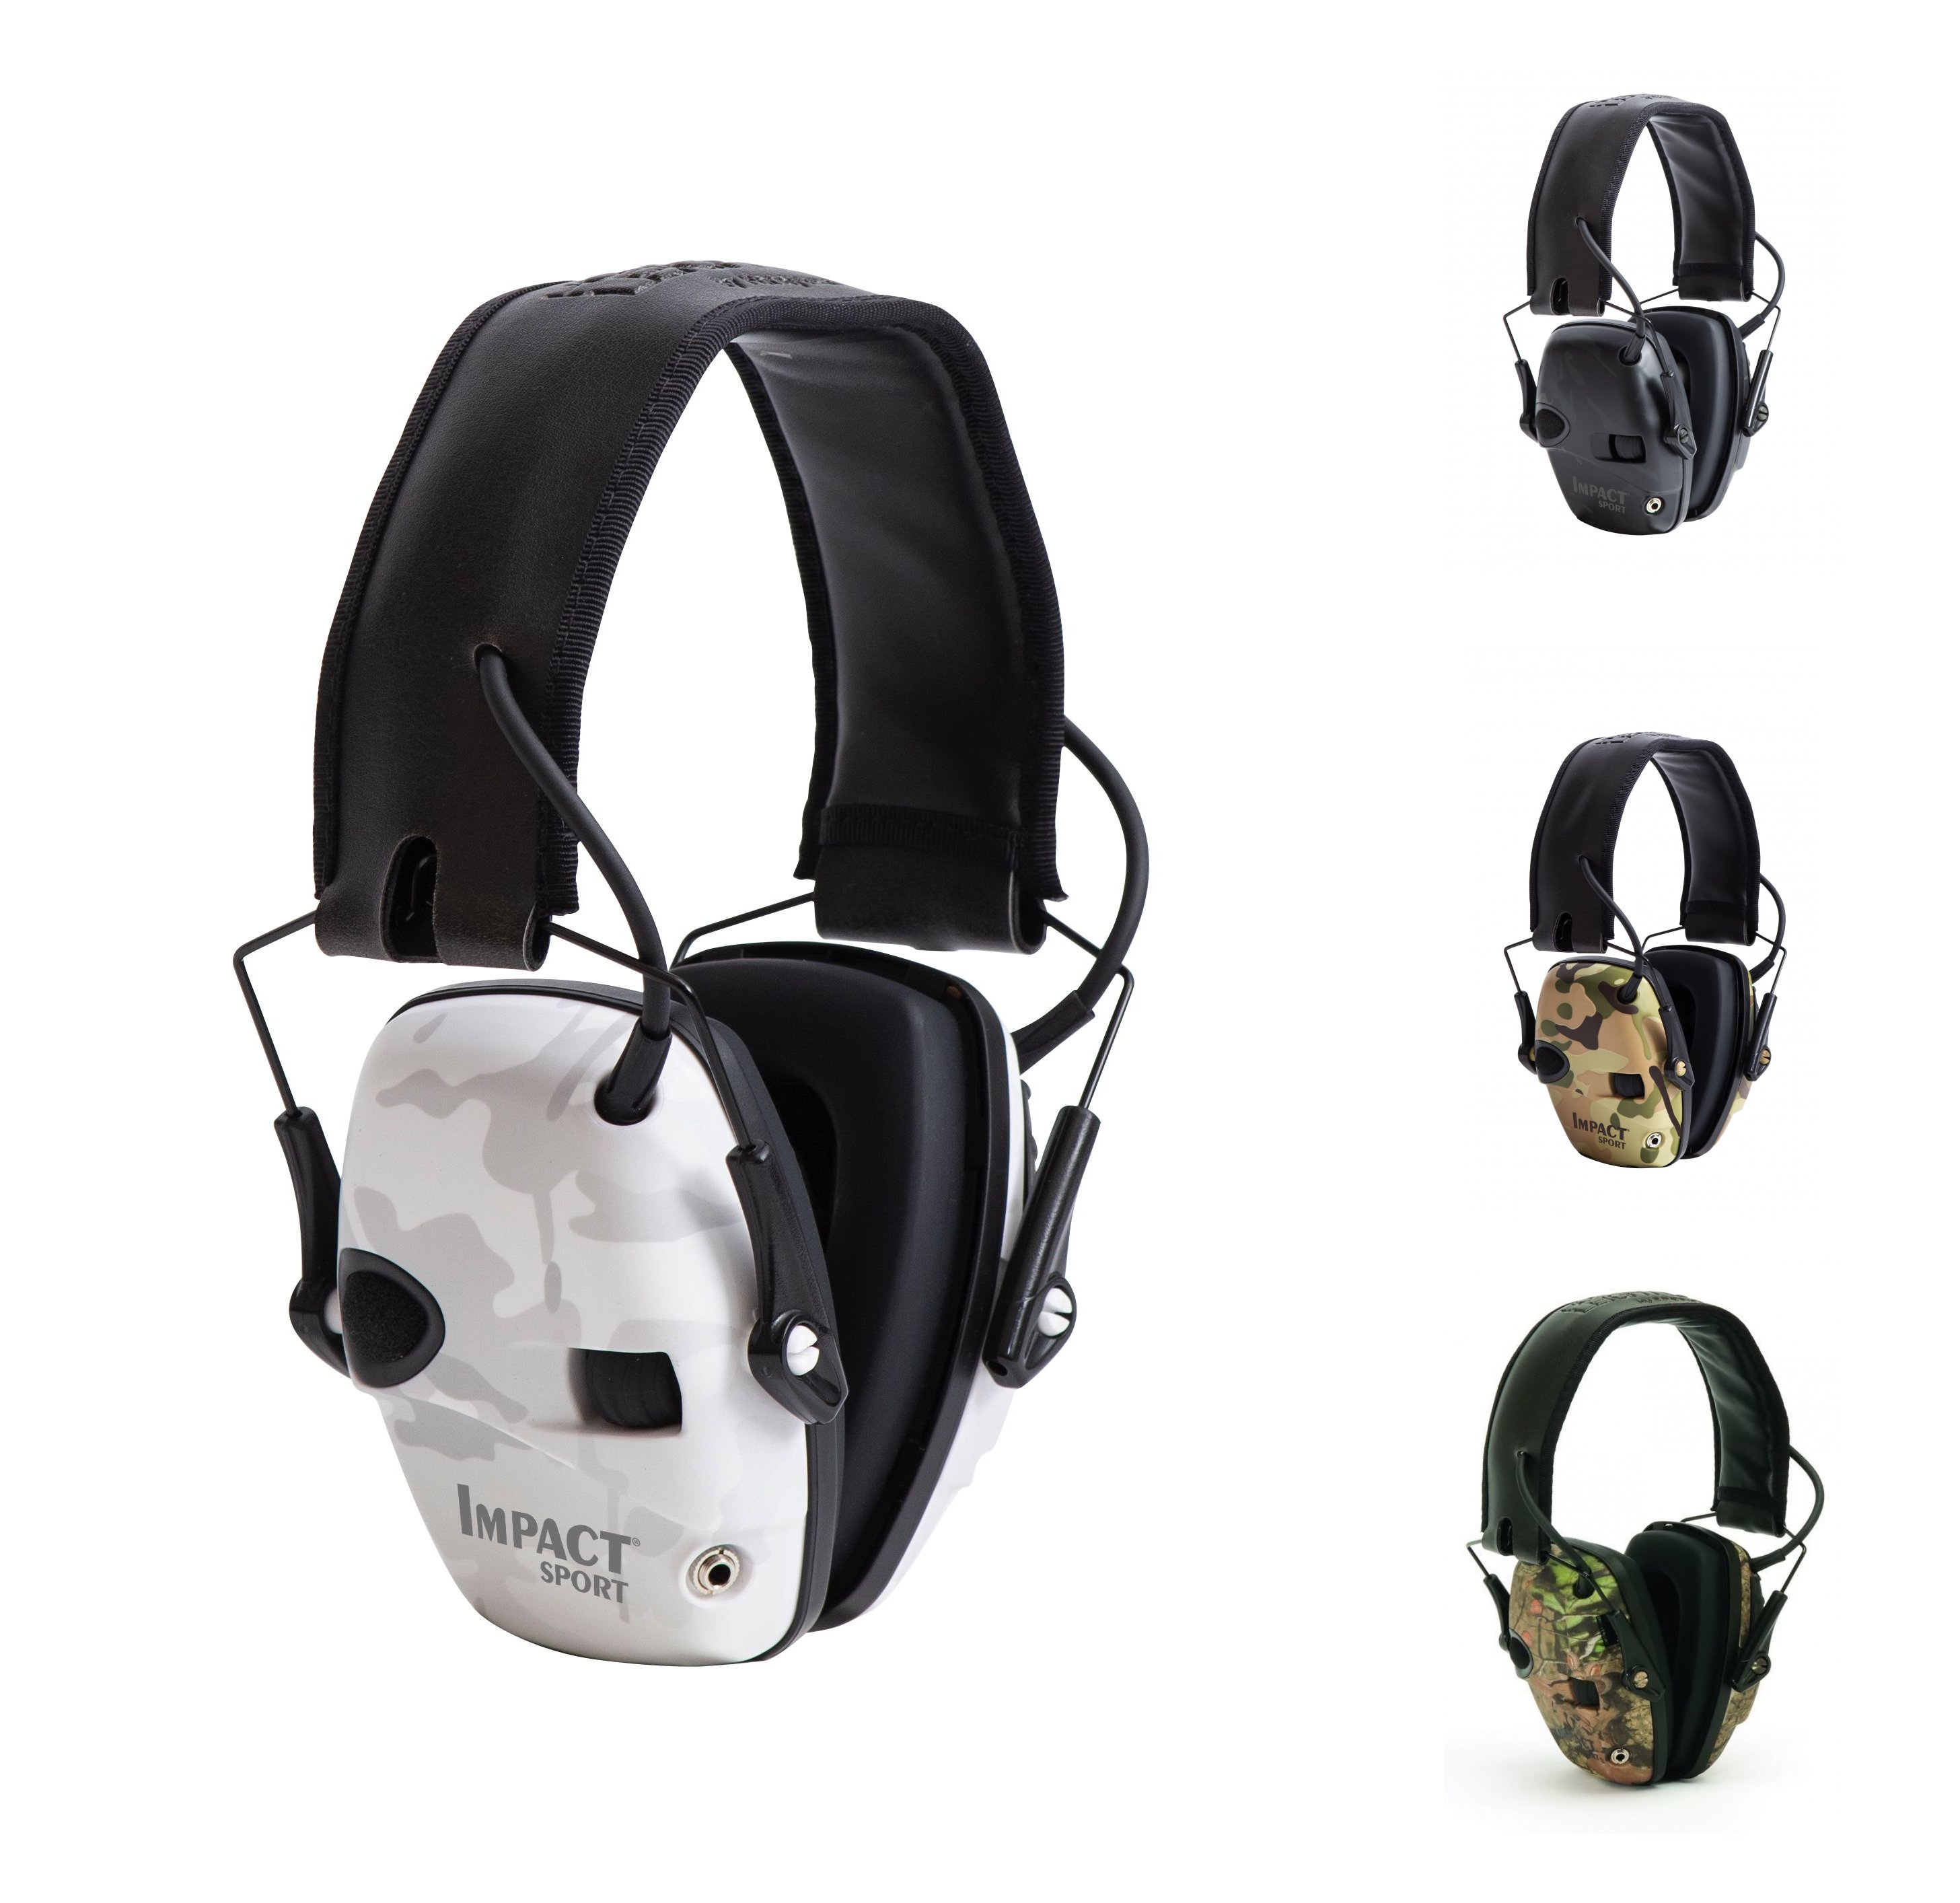 Howard Leight Impact Sport MultiCam Electronic Earmuff Up to $8.90 Off  4.2 Star Rating w/ Free Shipping